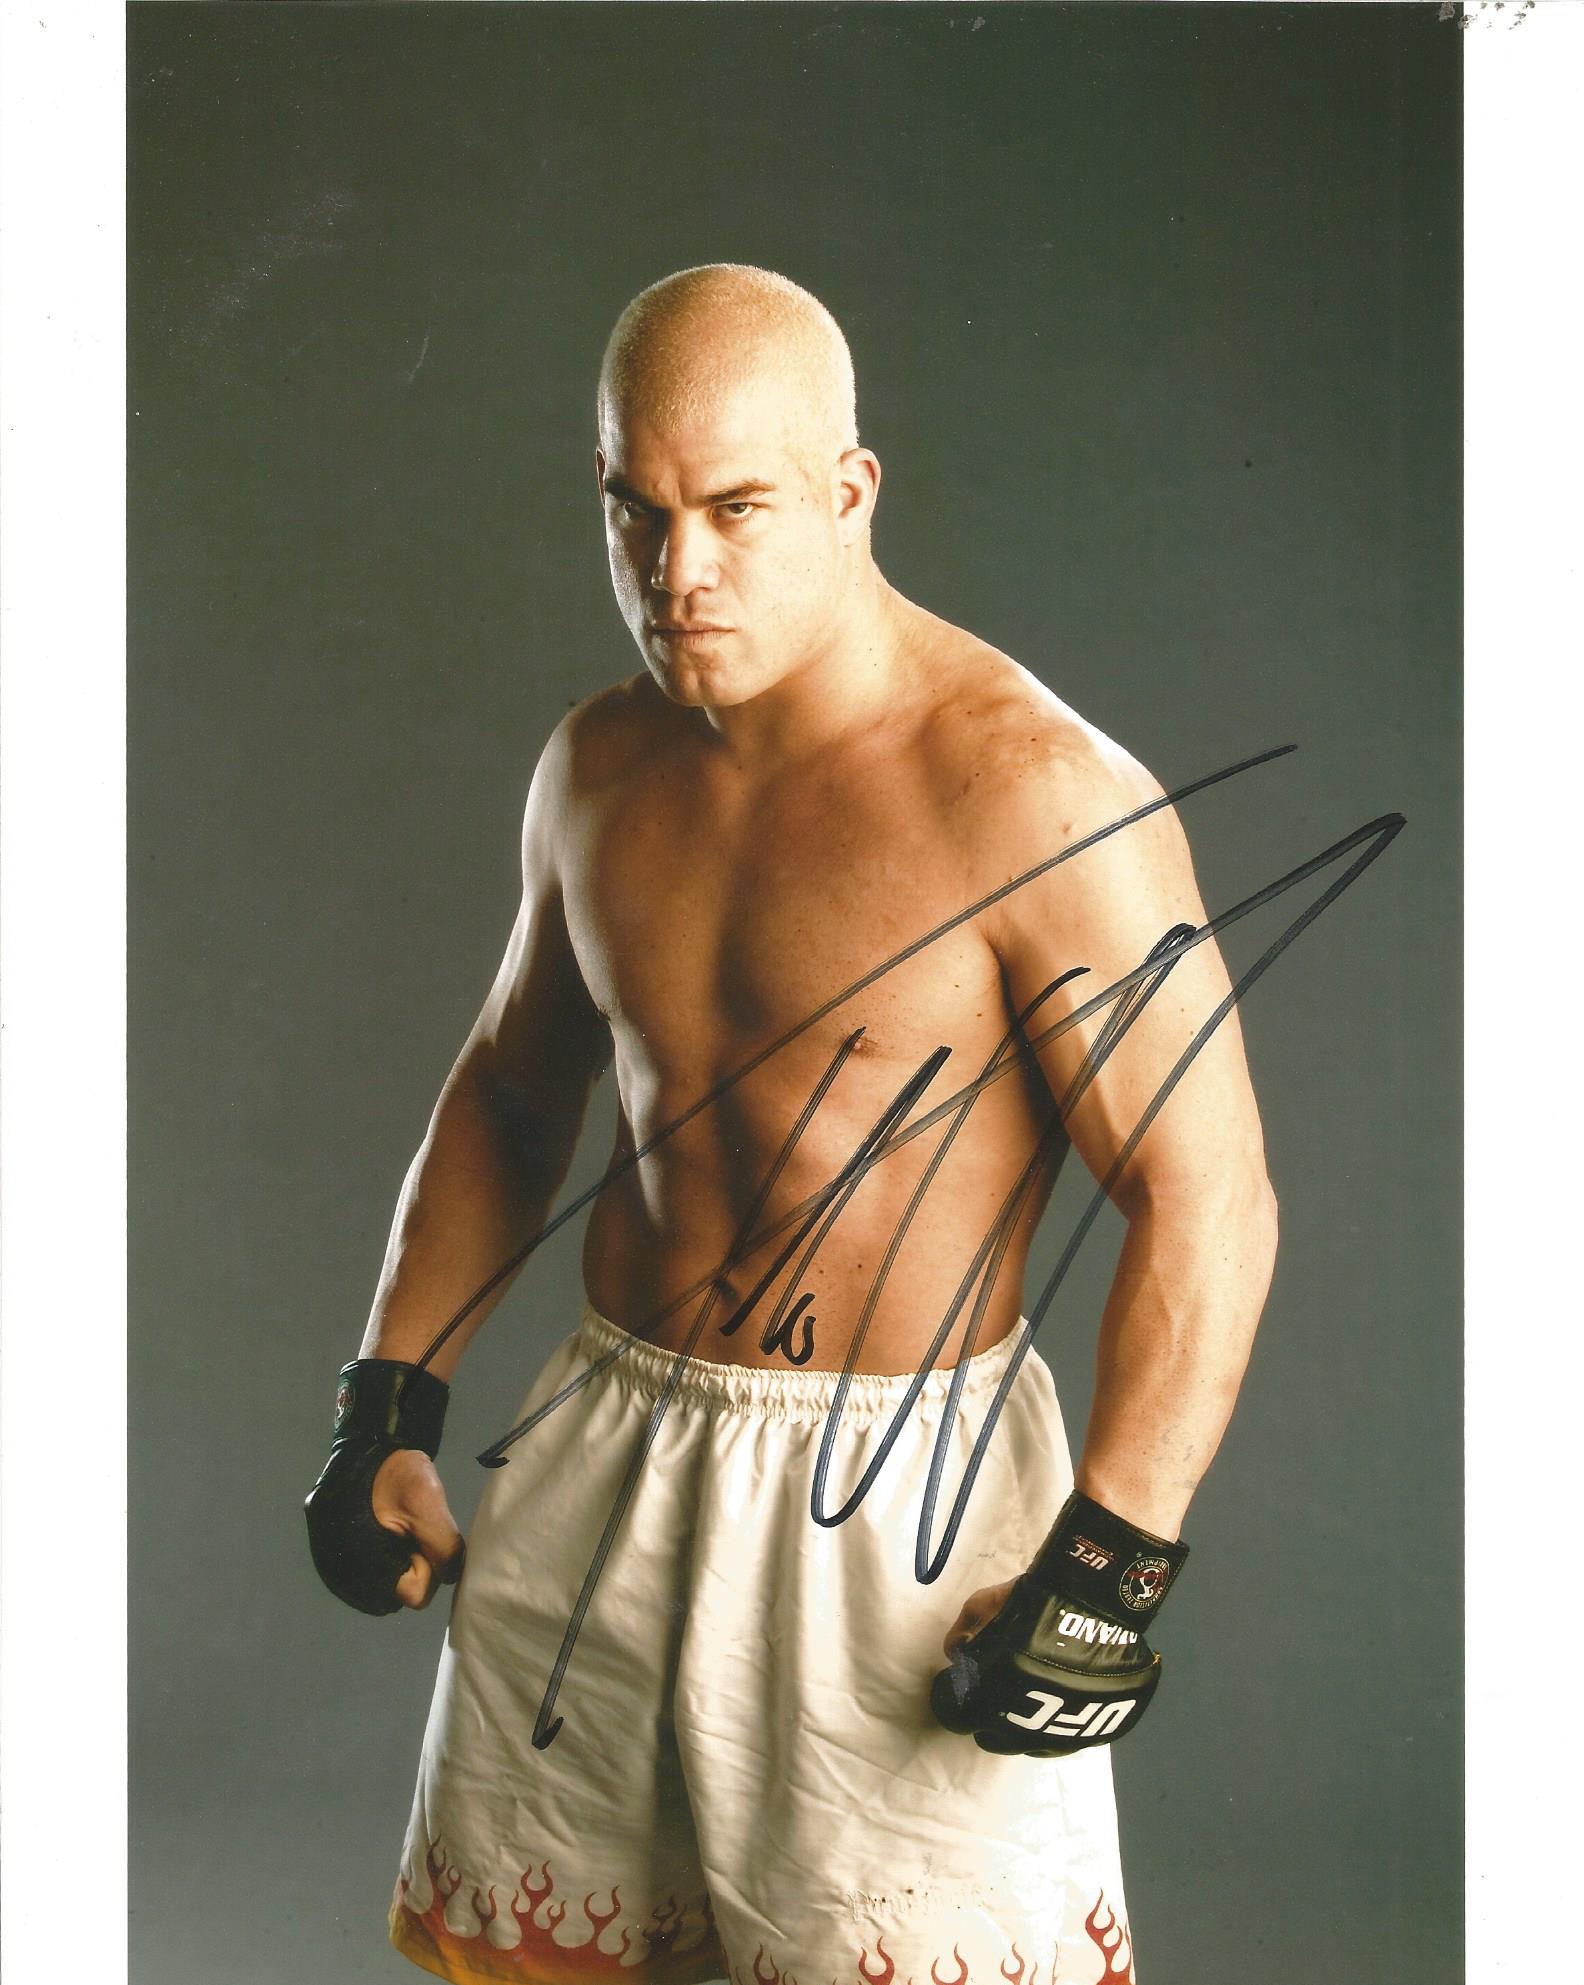 Tito Ortiz UFC MMA hand signed 10x8 photo. This beautiful hand signed photo depicts former UFC and